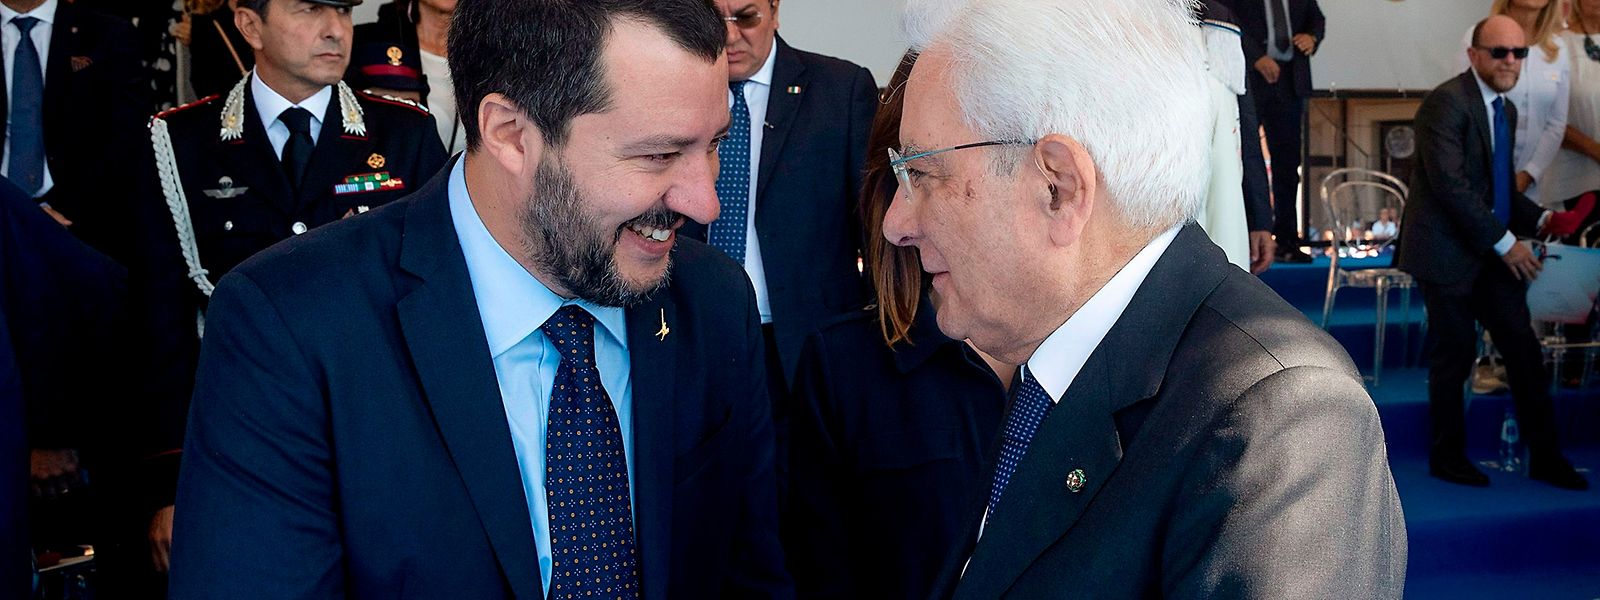 A handout photo made available on September 30, 2018 by the Quirinale Press Office shows Italian President Sergio Mattarella (L) shaking hand with Italy's Deputy Prime Minister and Interior Minister, Matteo Salvini on September 30, 2018 durign a meeting on the occasion of the 50th anniversary of the foundation of the National Association of the State Police, in Ostia, west of Rome. (Photo by Paolo GIANDOTTI / Quirinale Press Office / AFP) / XGTY / RESTRICTED TO EDITORIAL USE - MANDATORY CREDIT "AFP PHOTO / QUIRINALE PRESS OFFICE/PAOLO GIANDOTTI" - NO MARKETING NO ADVERTISING CAMPAIGNS - DISTRIBUTED AS A SERVICE TO CLIENTS